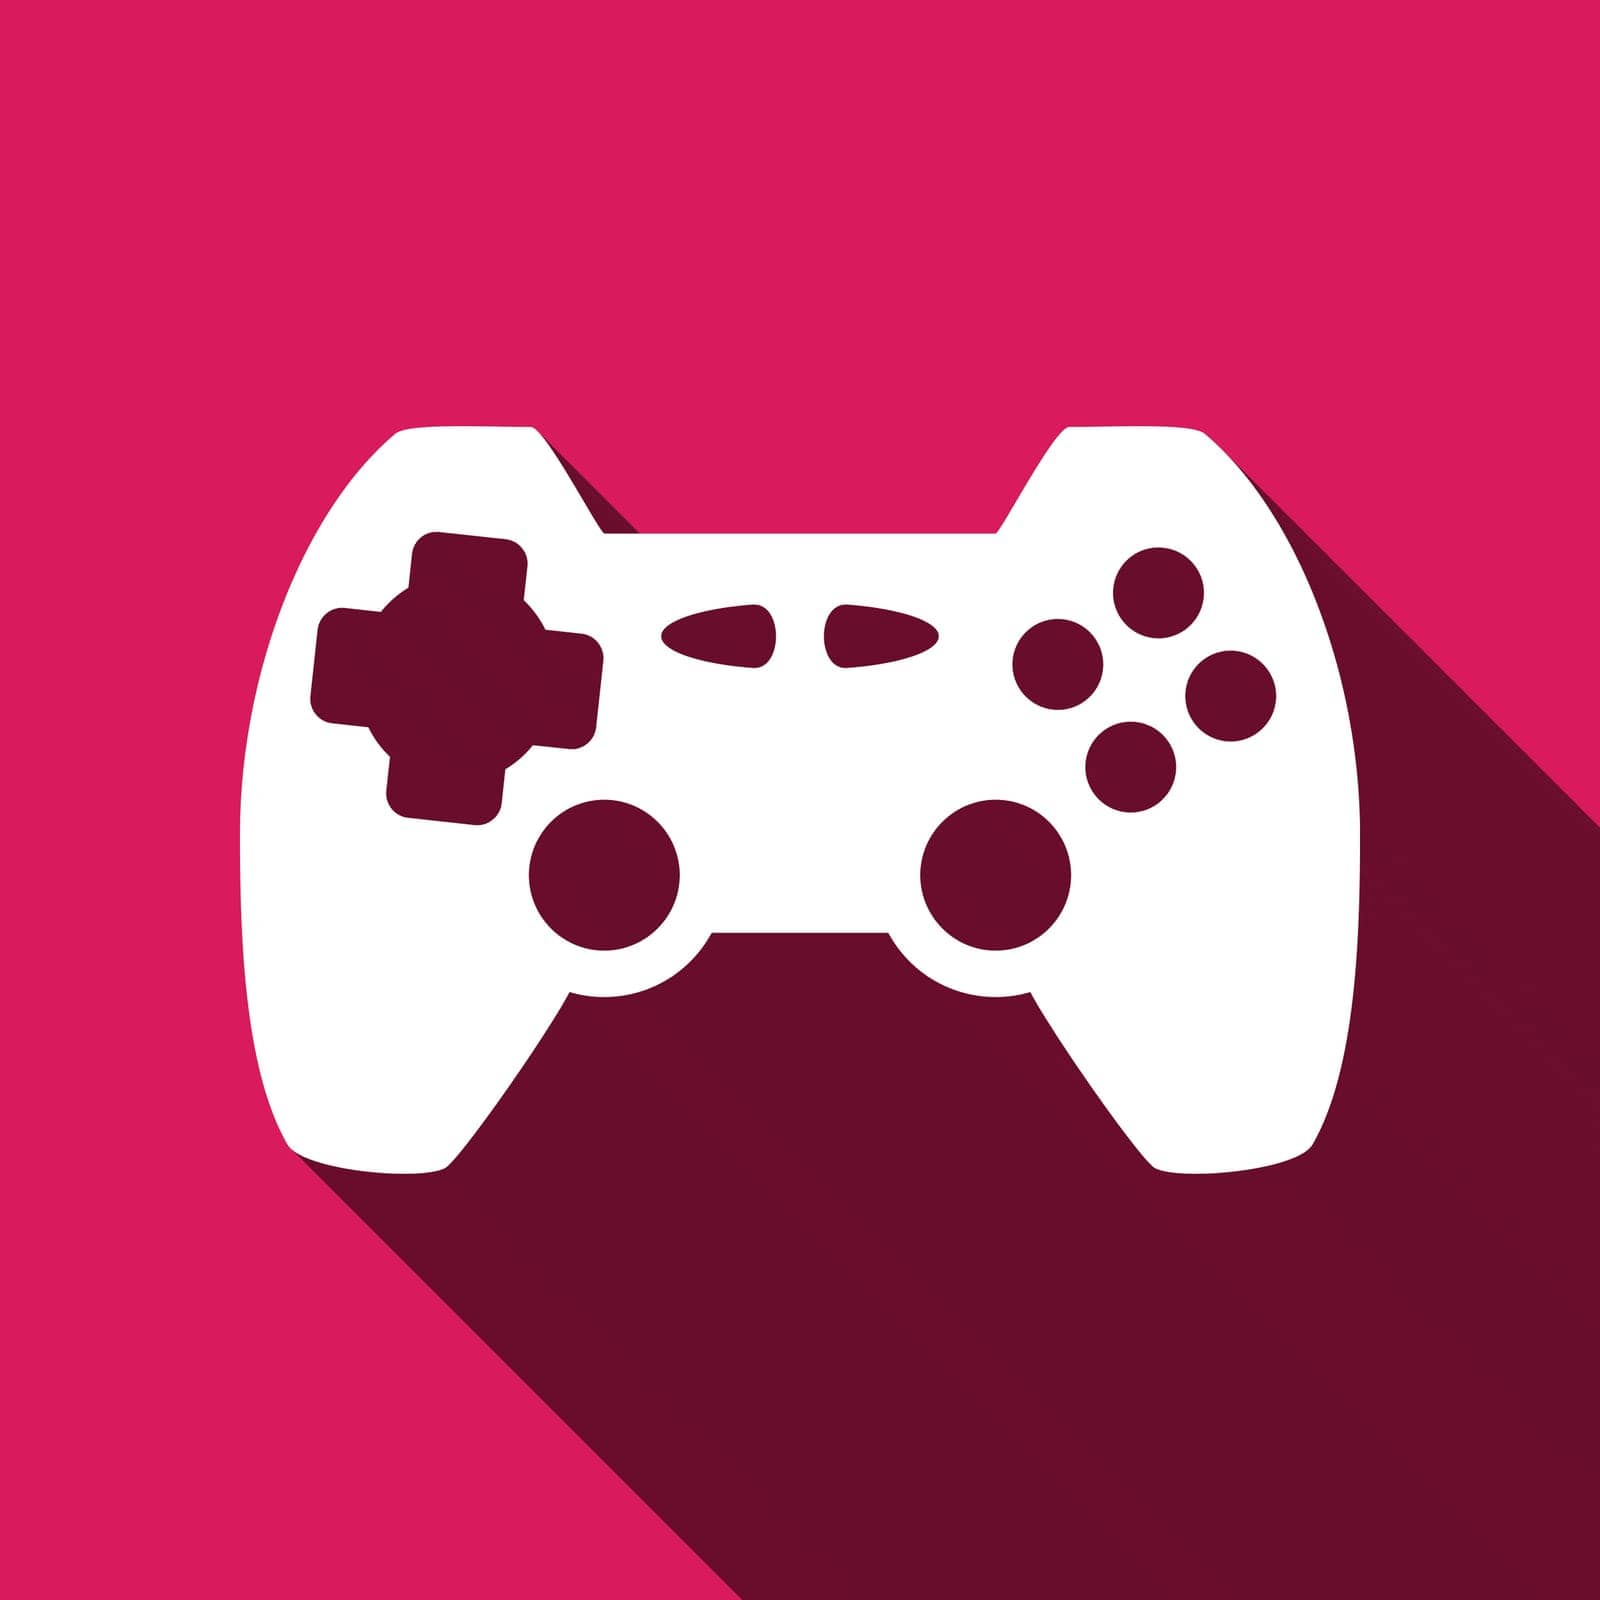 play,symbol,game,color,entertainment,concept,icon,sign,isolated,video,media,button,computer,playstation,pad,white,top,flat,videogame,design,vector,leisure,graphic,element,digital,app,console,gaming,controller,mobile,joystick,control,technology,push,background,gamepad,online,illustration,internet,fun,object